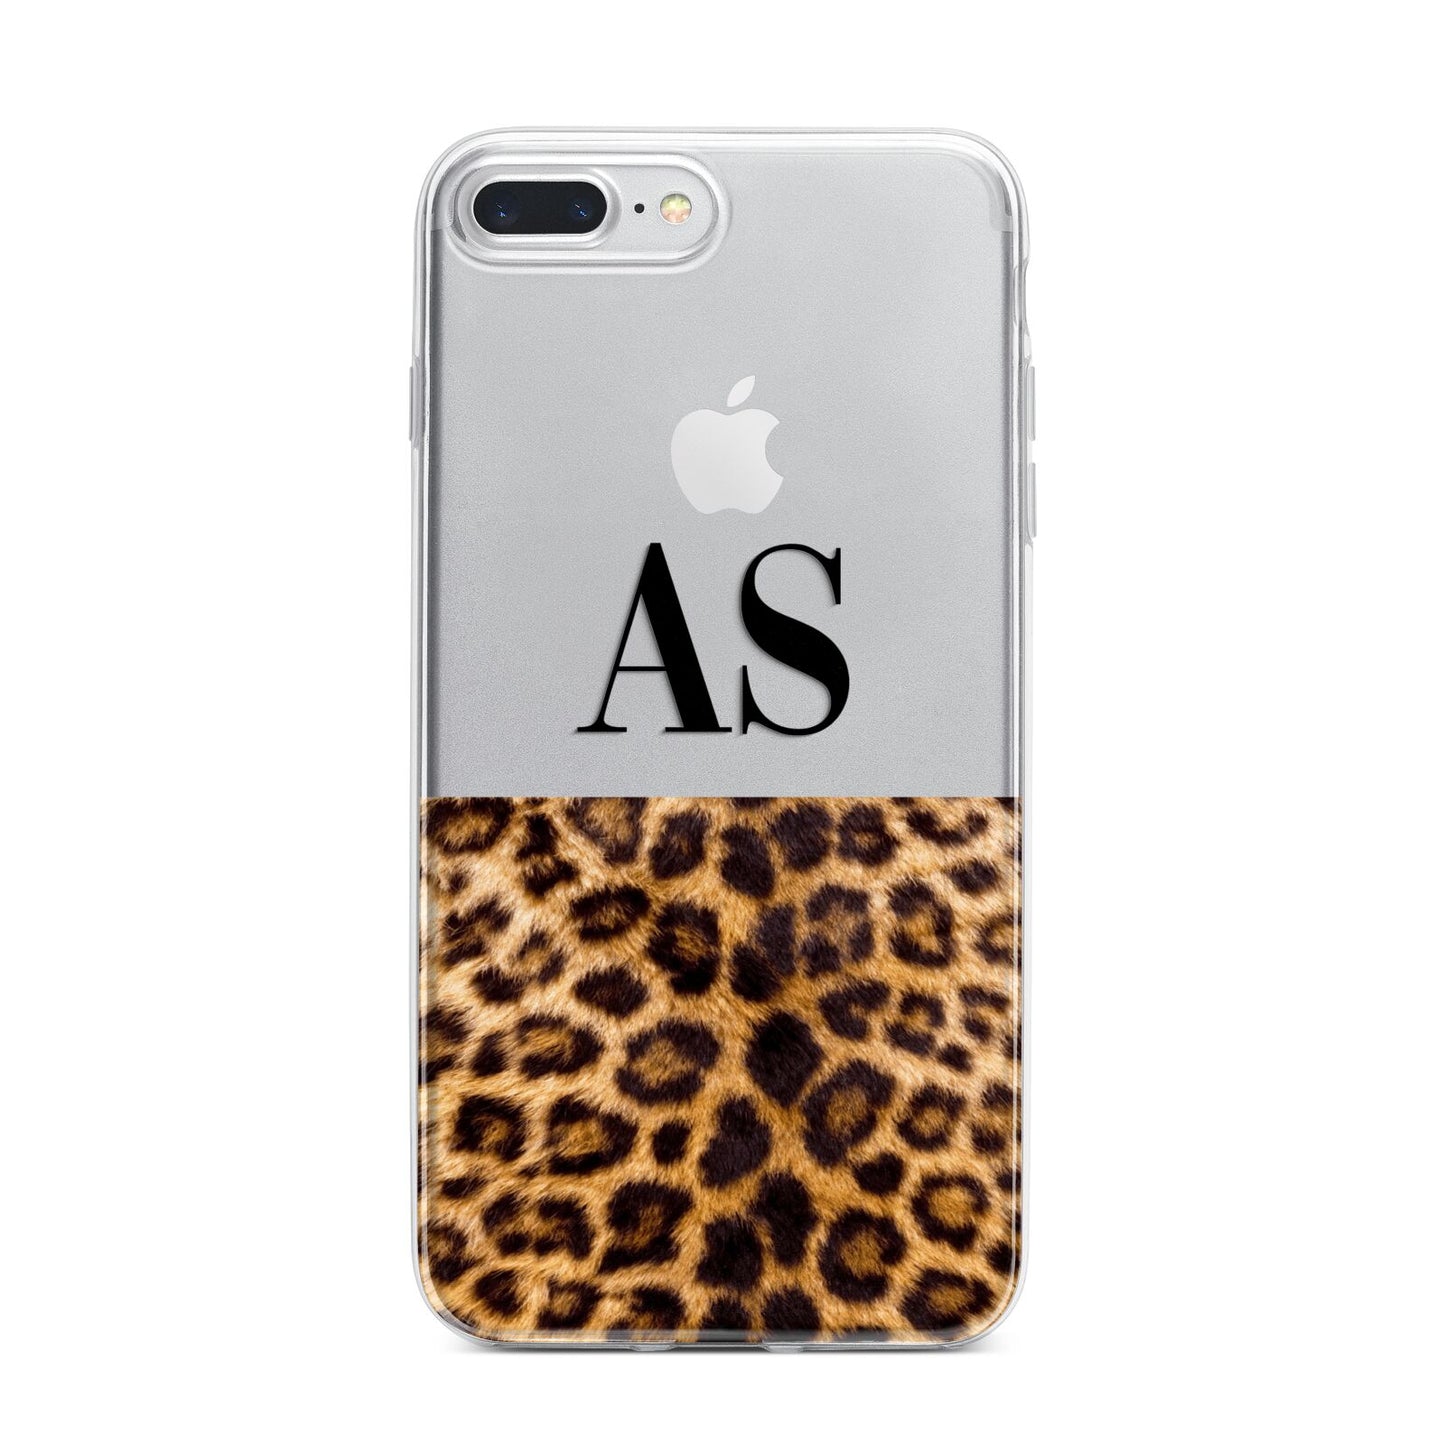 Initialled Leopard Print iPhone 7 Plus Bumper Case on Silver iPhone